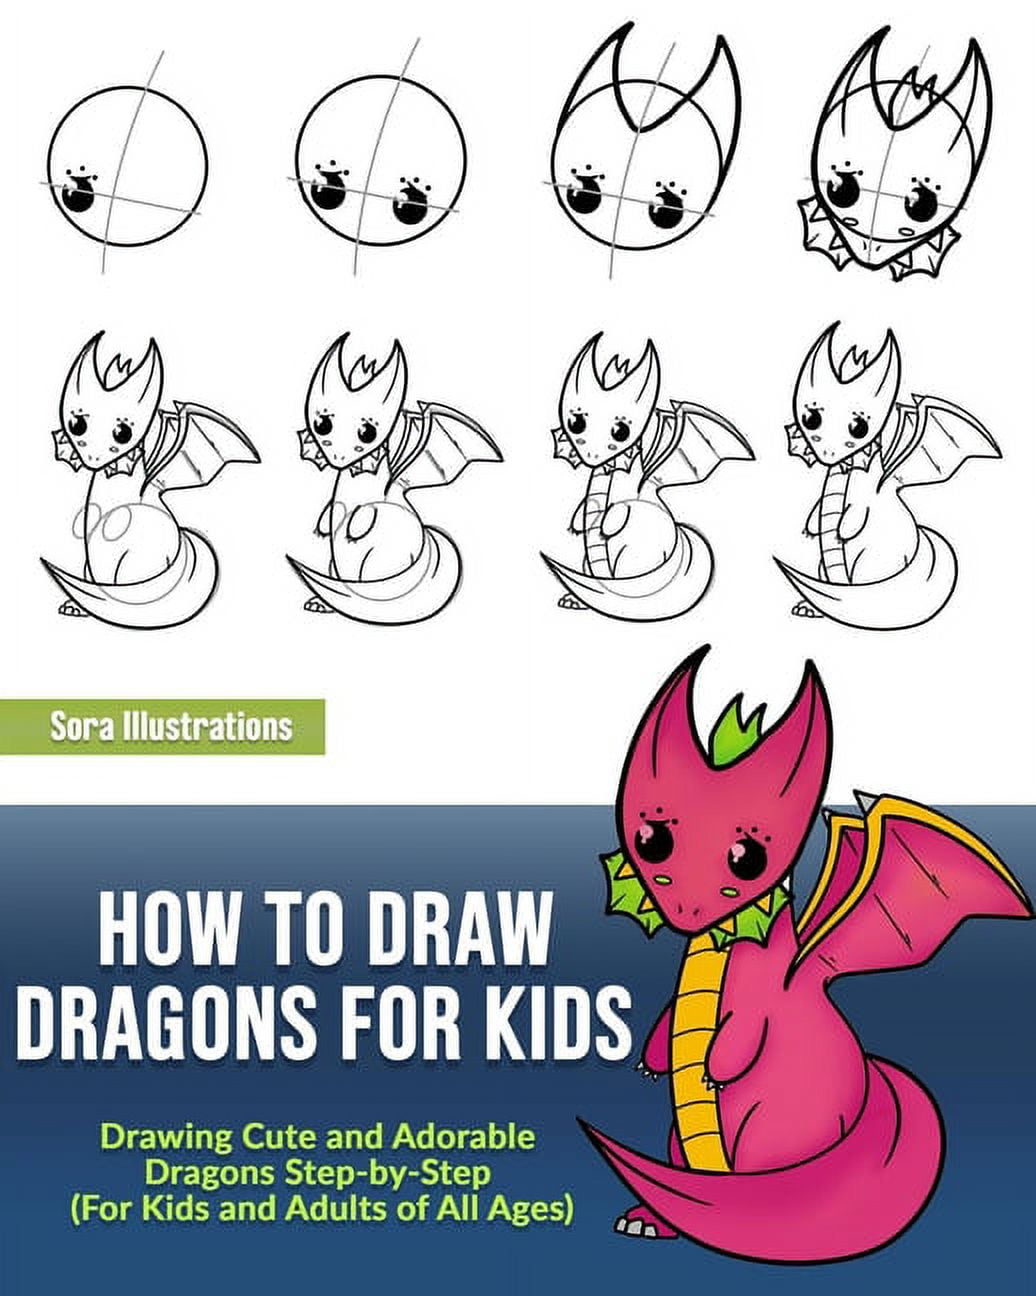 How To Draw Dragons for Adults: Easy Step By Step How To Draw Book For  Adults With Fantasy Dragon, Drawing Books Gifts For Birthday, Christmas by  Eloisa Olive